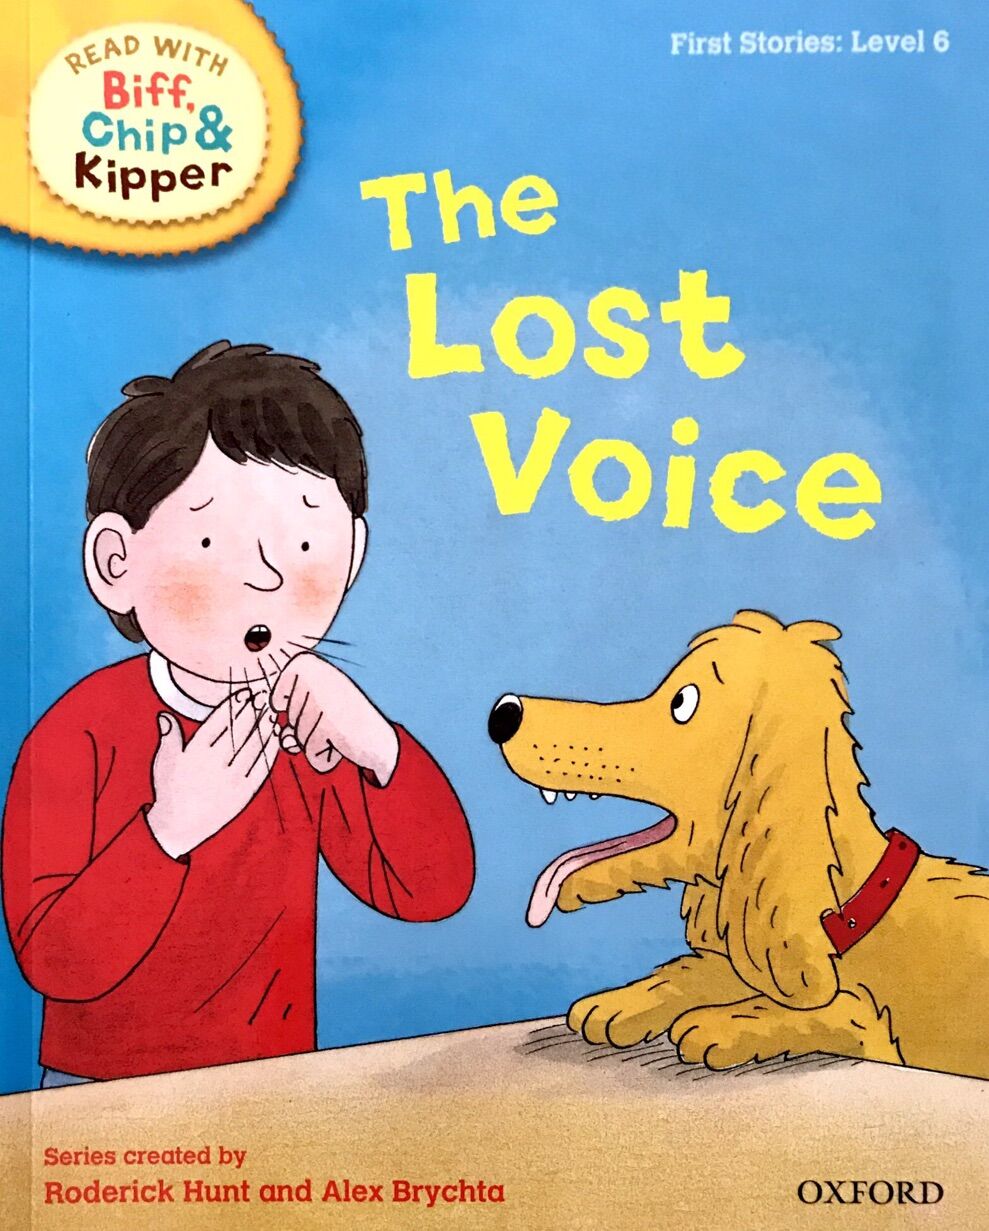 Oxford Reading Tree L4-L6 ：The Lost Voice 牛津阅读树6阶段